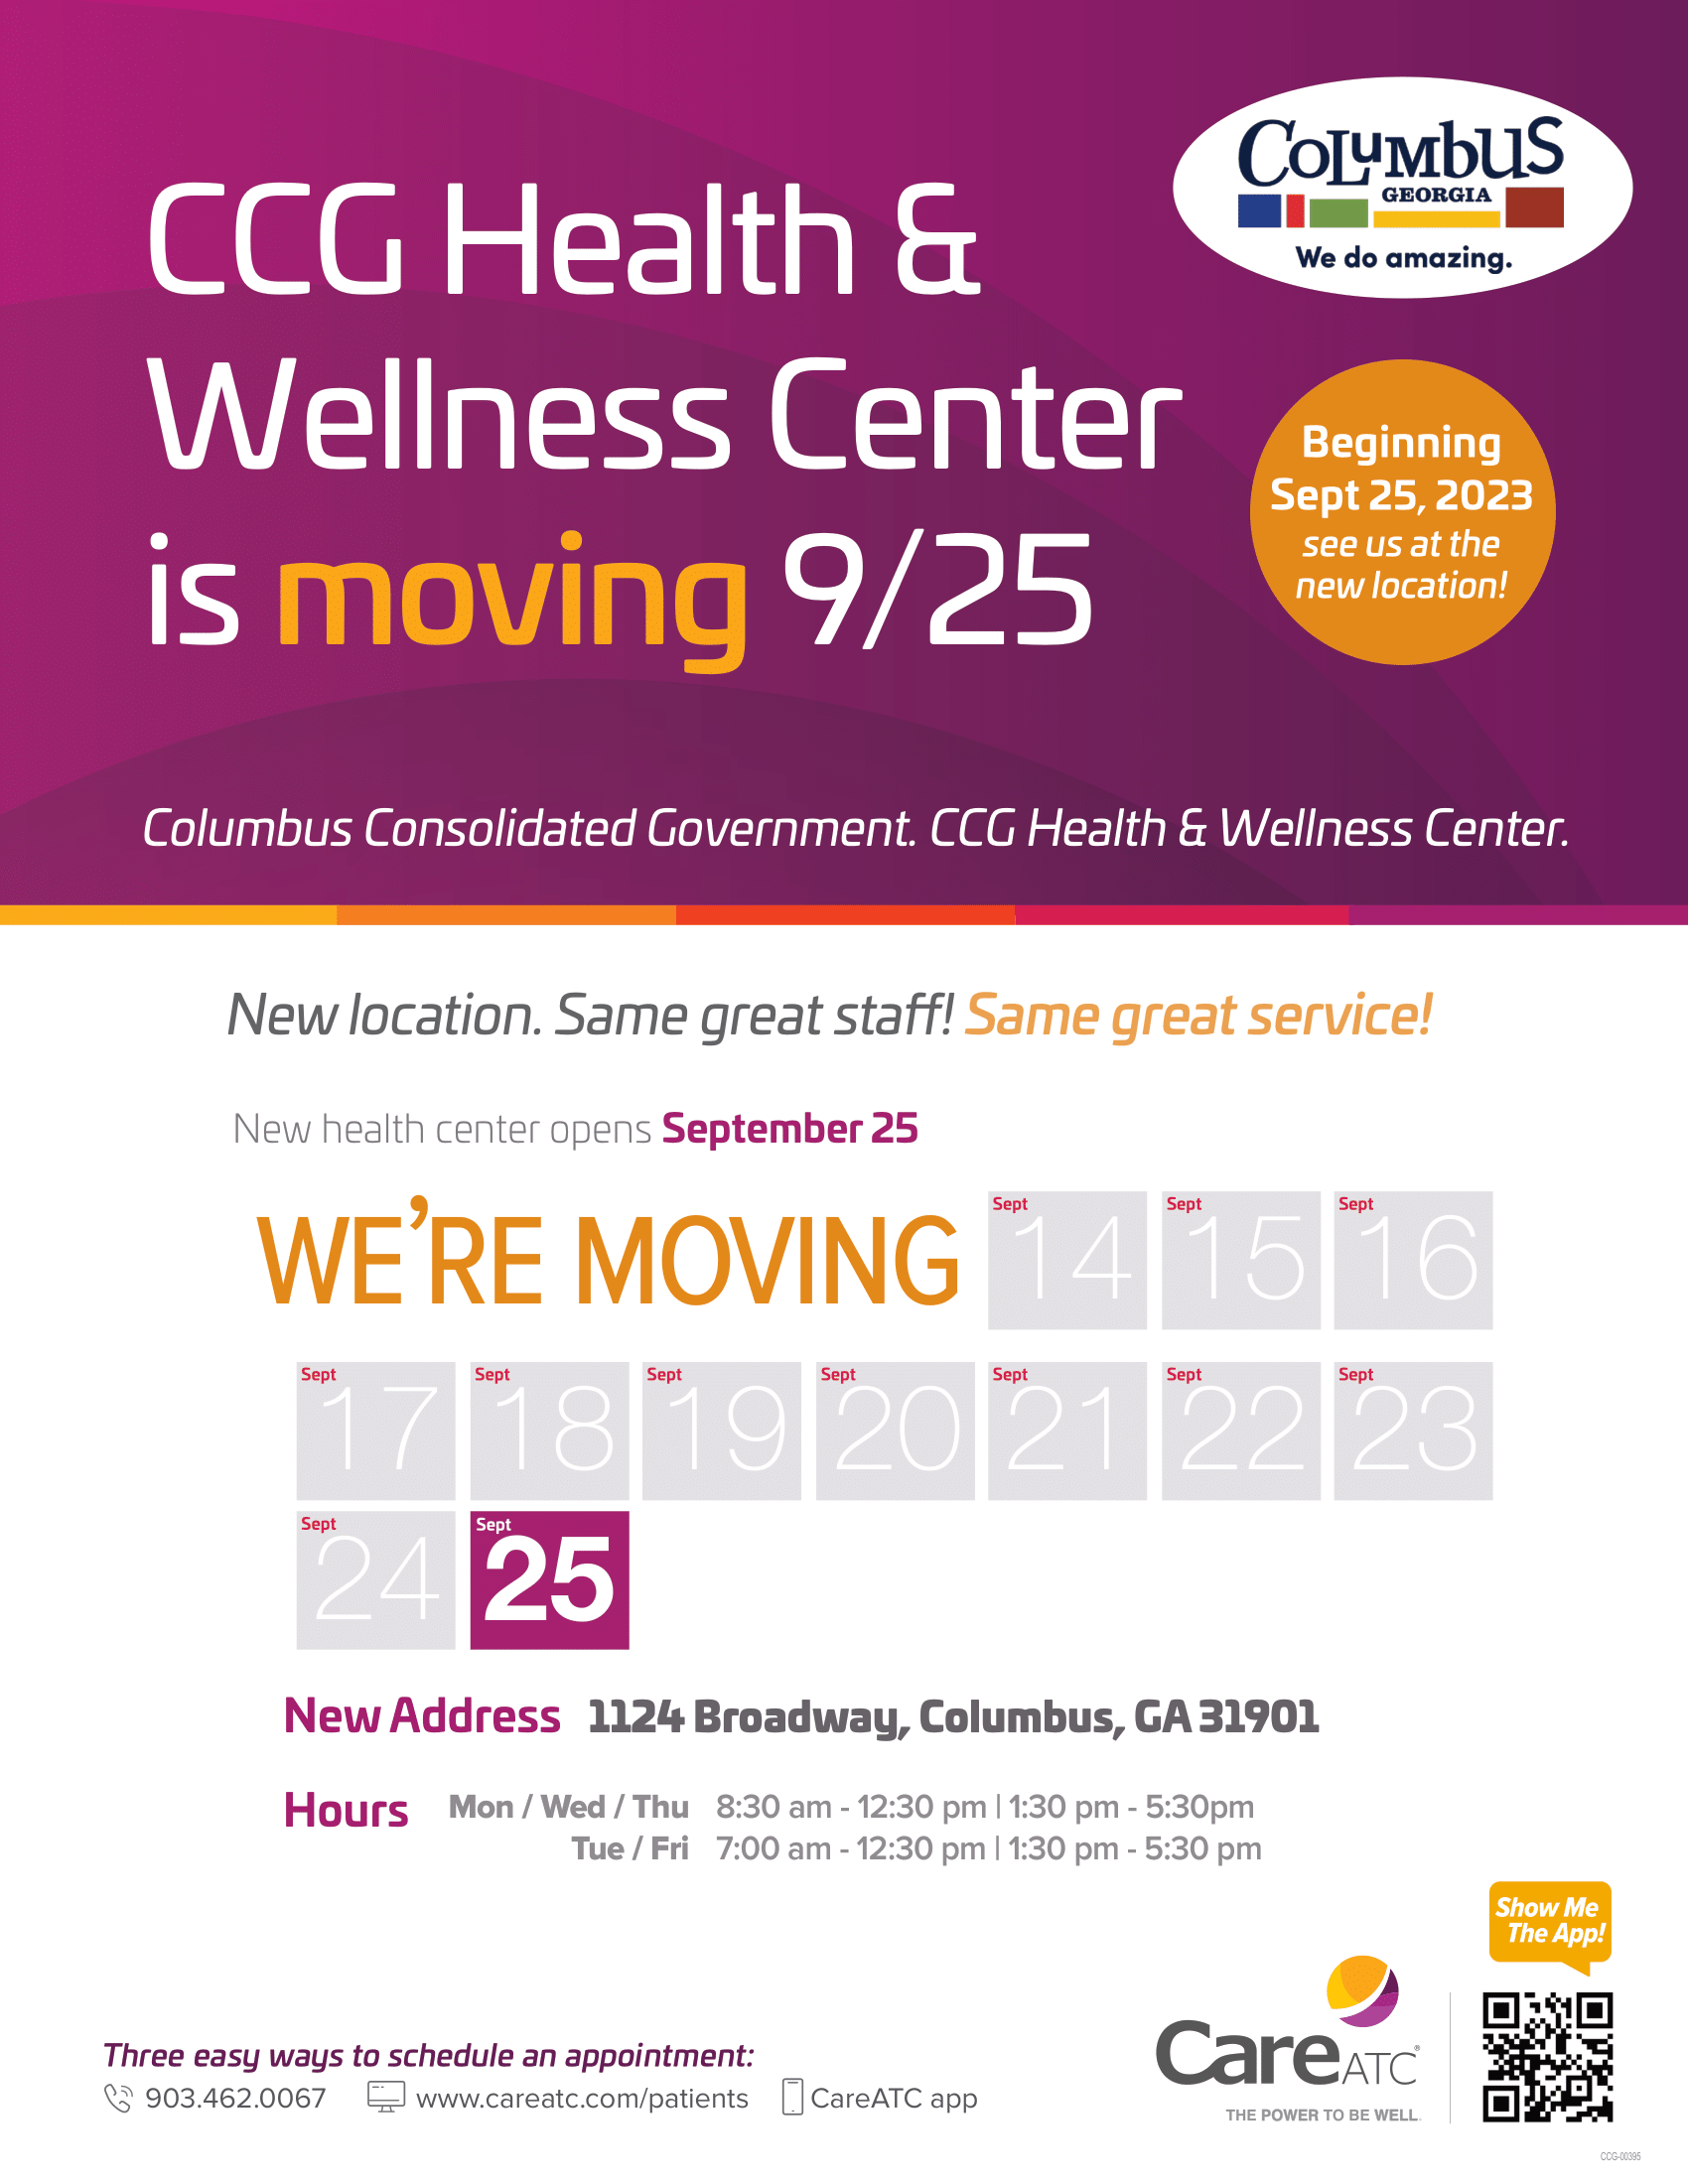 CCG Health and Wellness Center are moving 9/25. Click for more information.